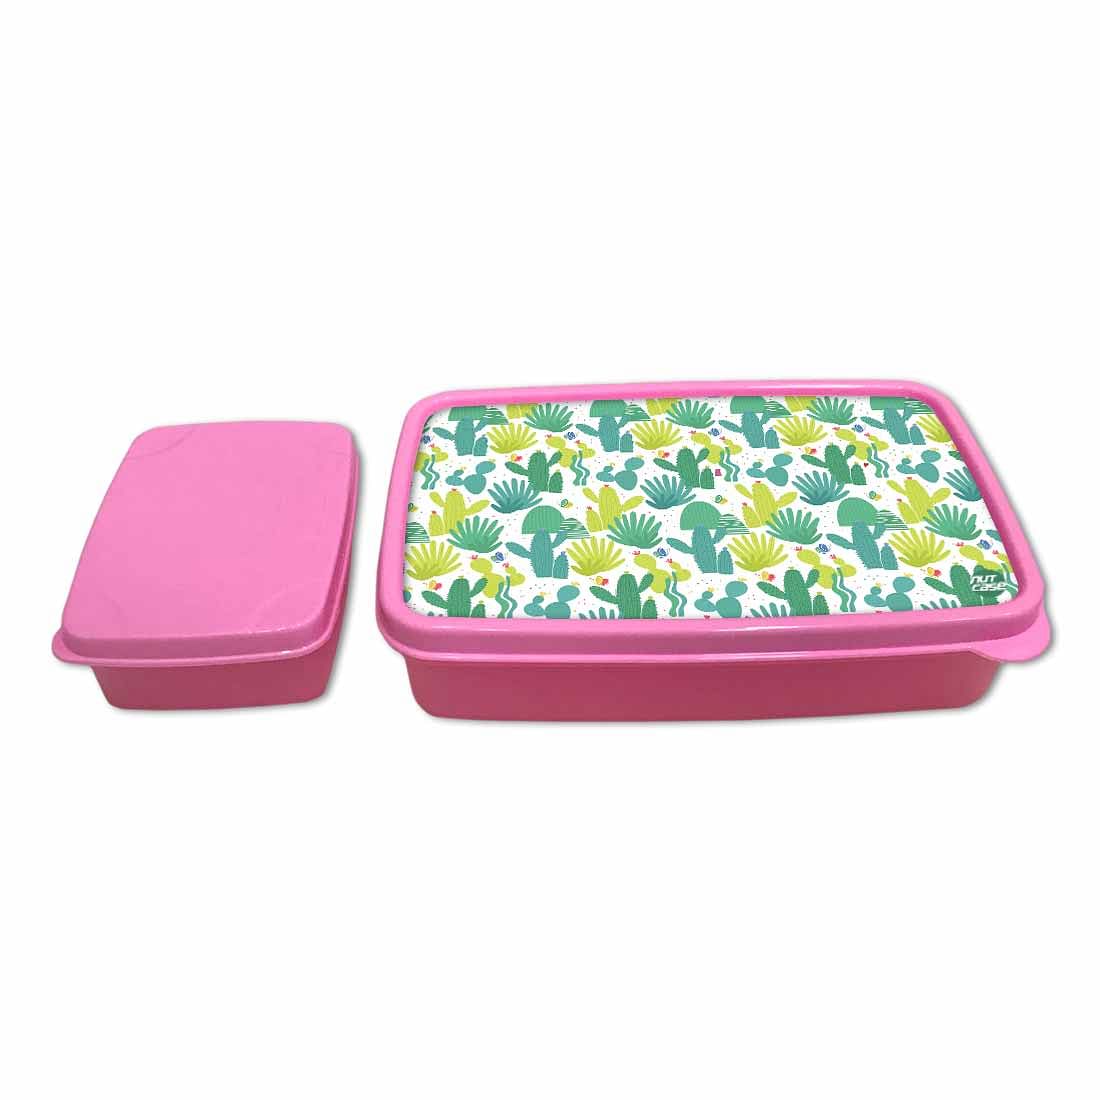 Kids Plastic Lunch Box for Girls School Snack Containers - Cactus Plant Nutcase